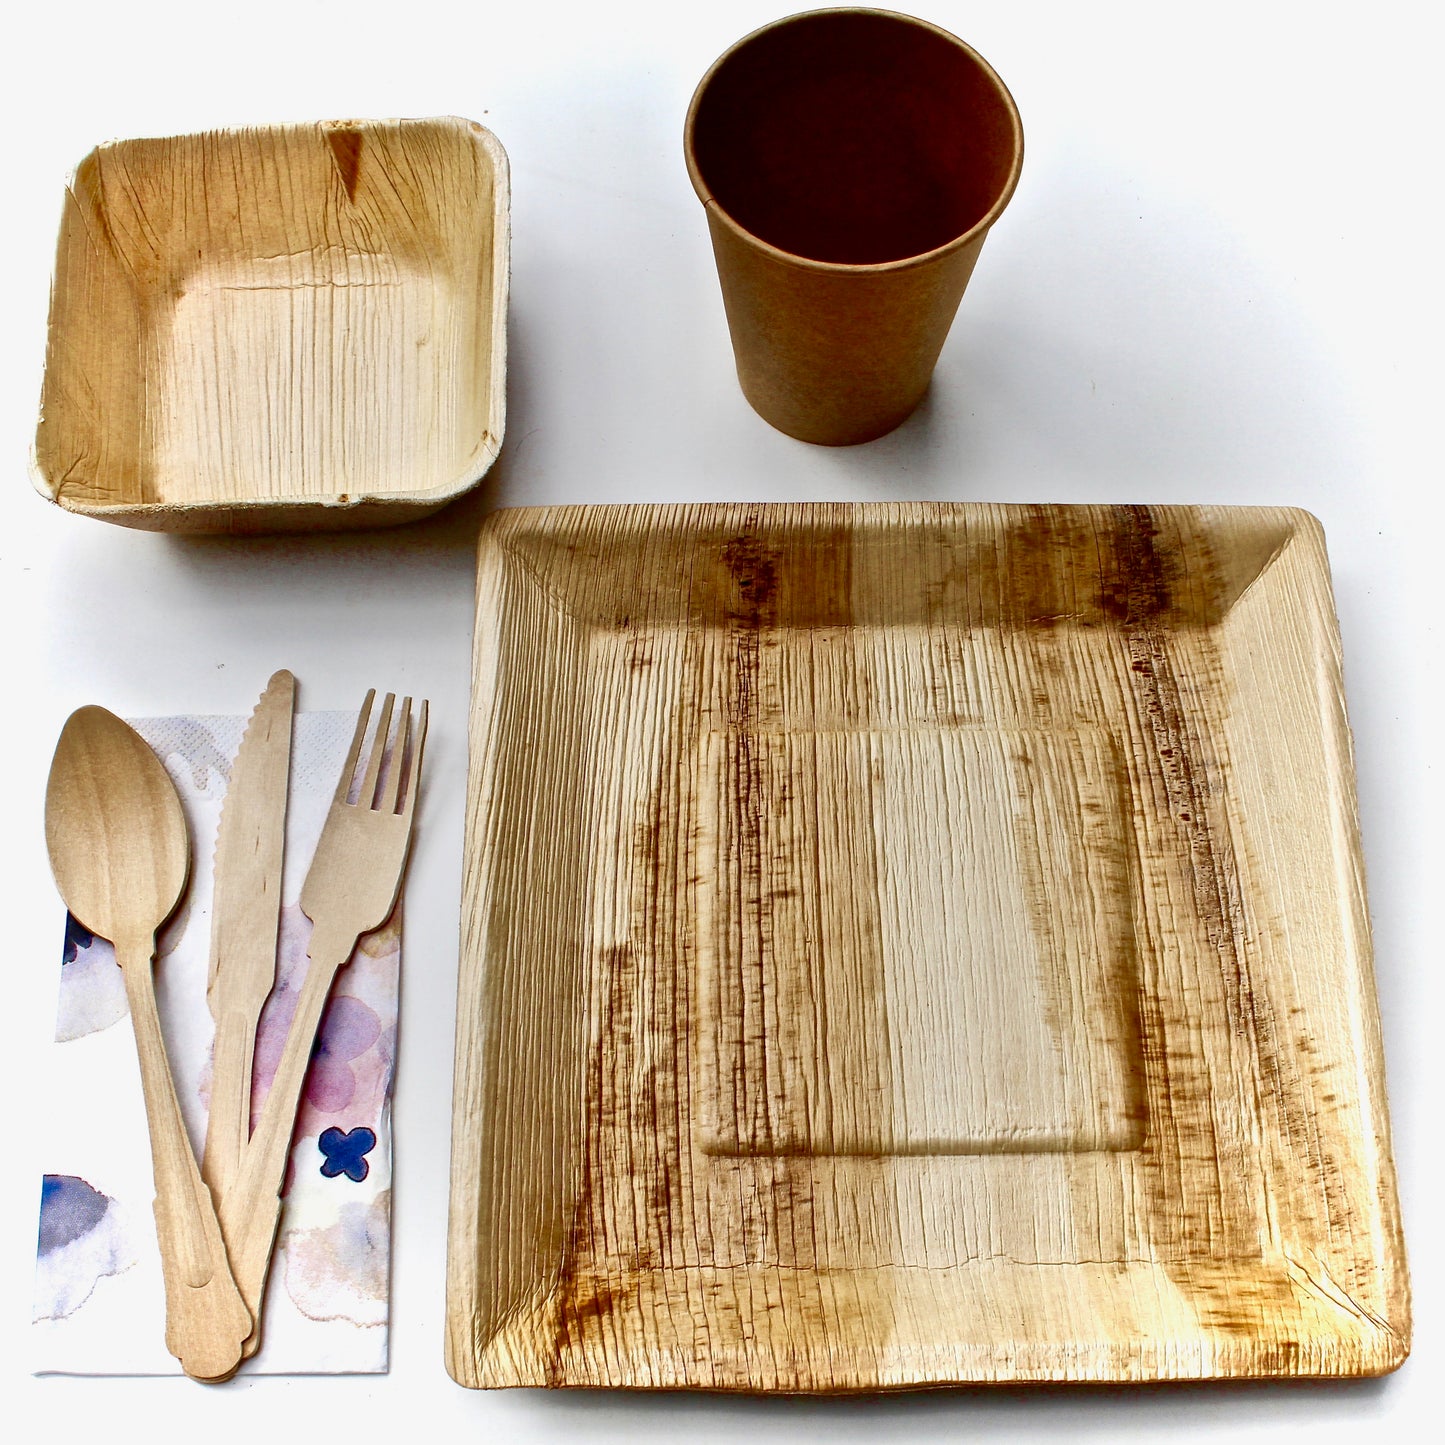 Bamboo Type Palm leaf plate 50 pices Square 10"  - 50 pic 6"heart  and 150 pic cutlery  eco frindly - biodegrable - disposable - compostable